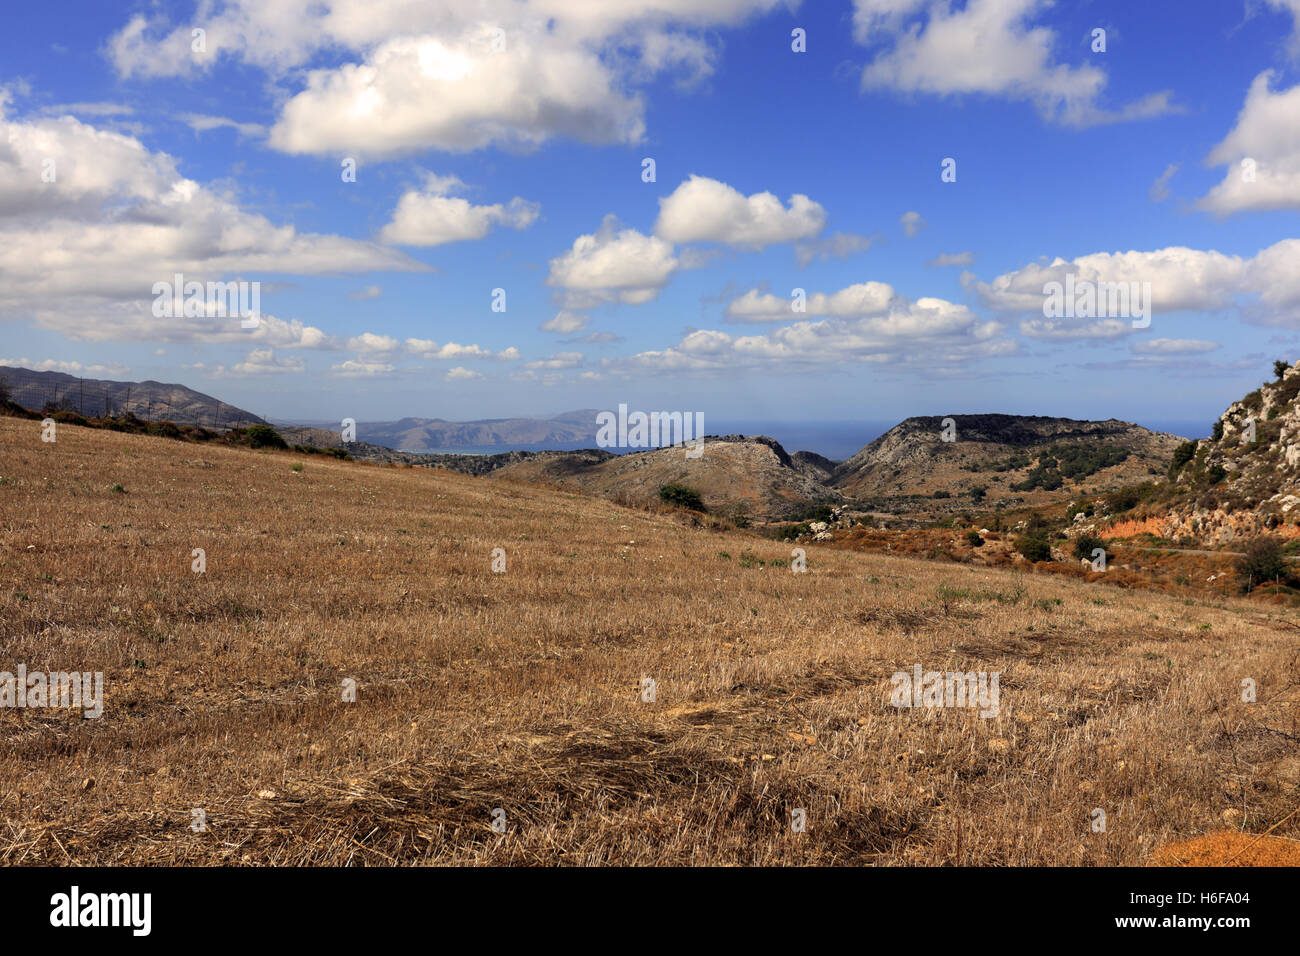 A stubble field near Moundros high in the mountains of central Crete, Greece, with spectacular views to Drapano peninsula. Stock Photo